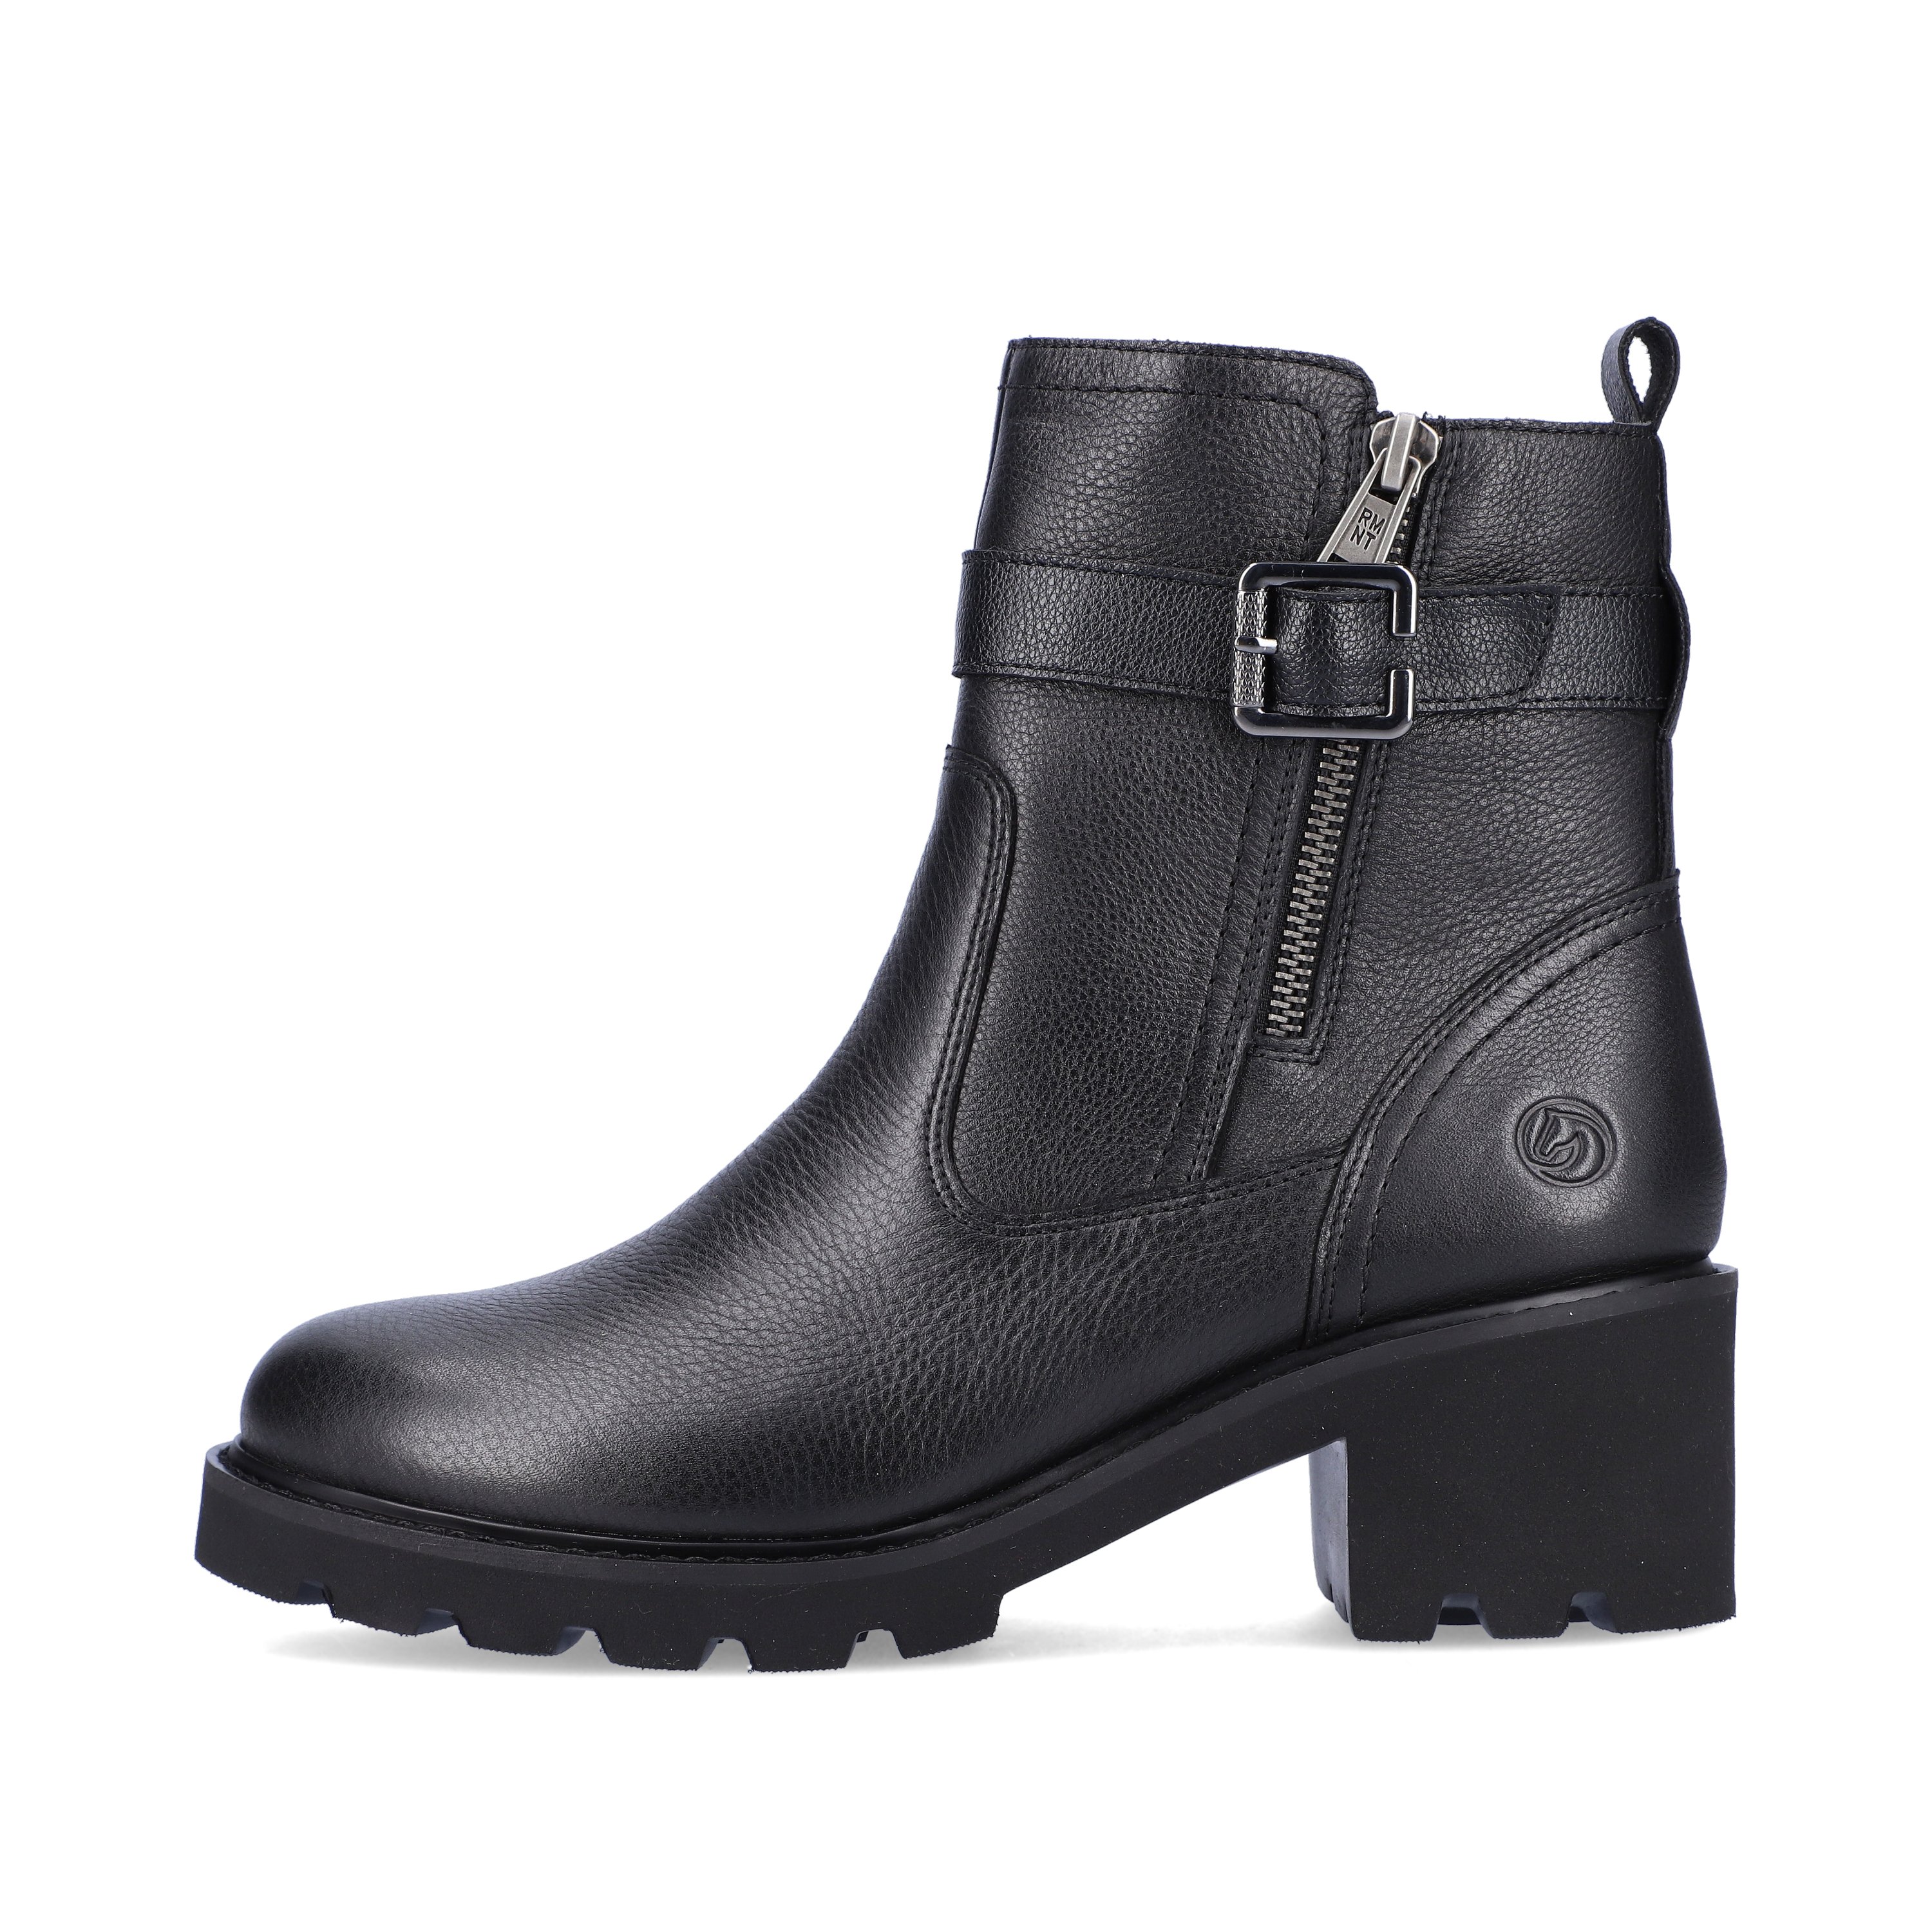 Glossy black remonte women´s biker boots D0A71-01 with zipper as well as block heel. The outside of the shoe